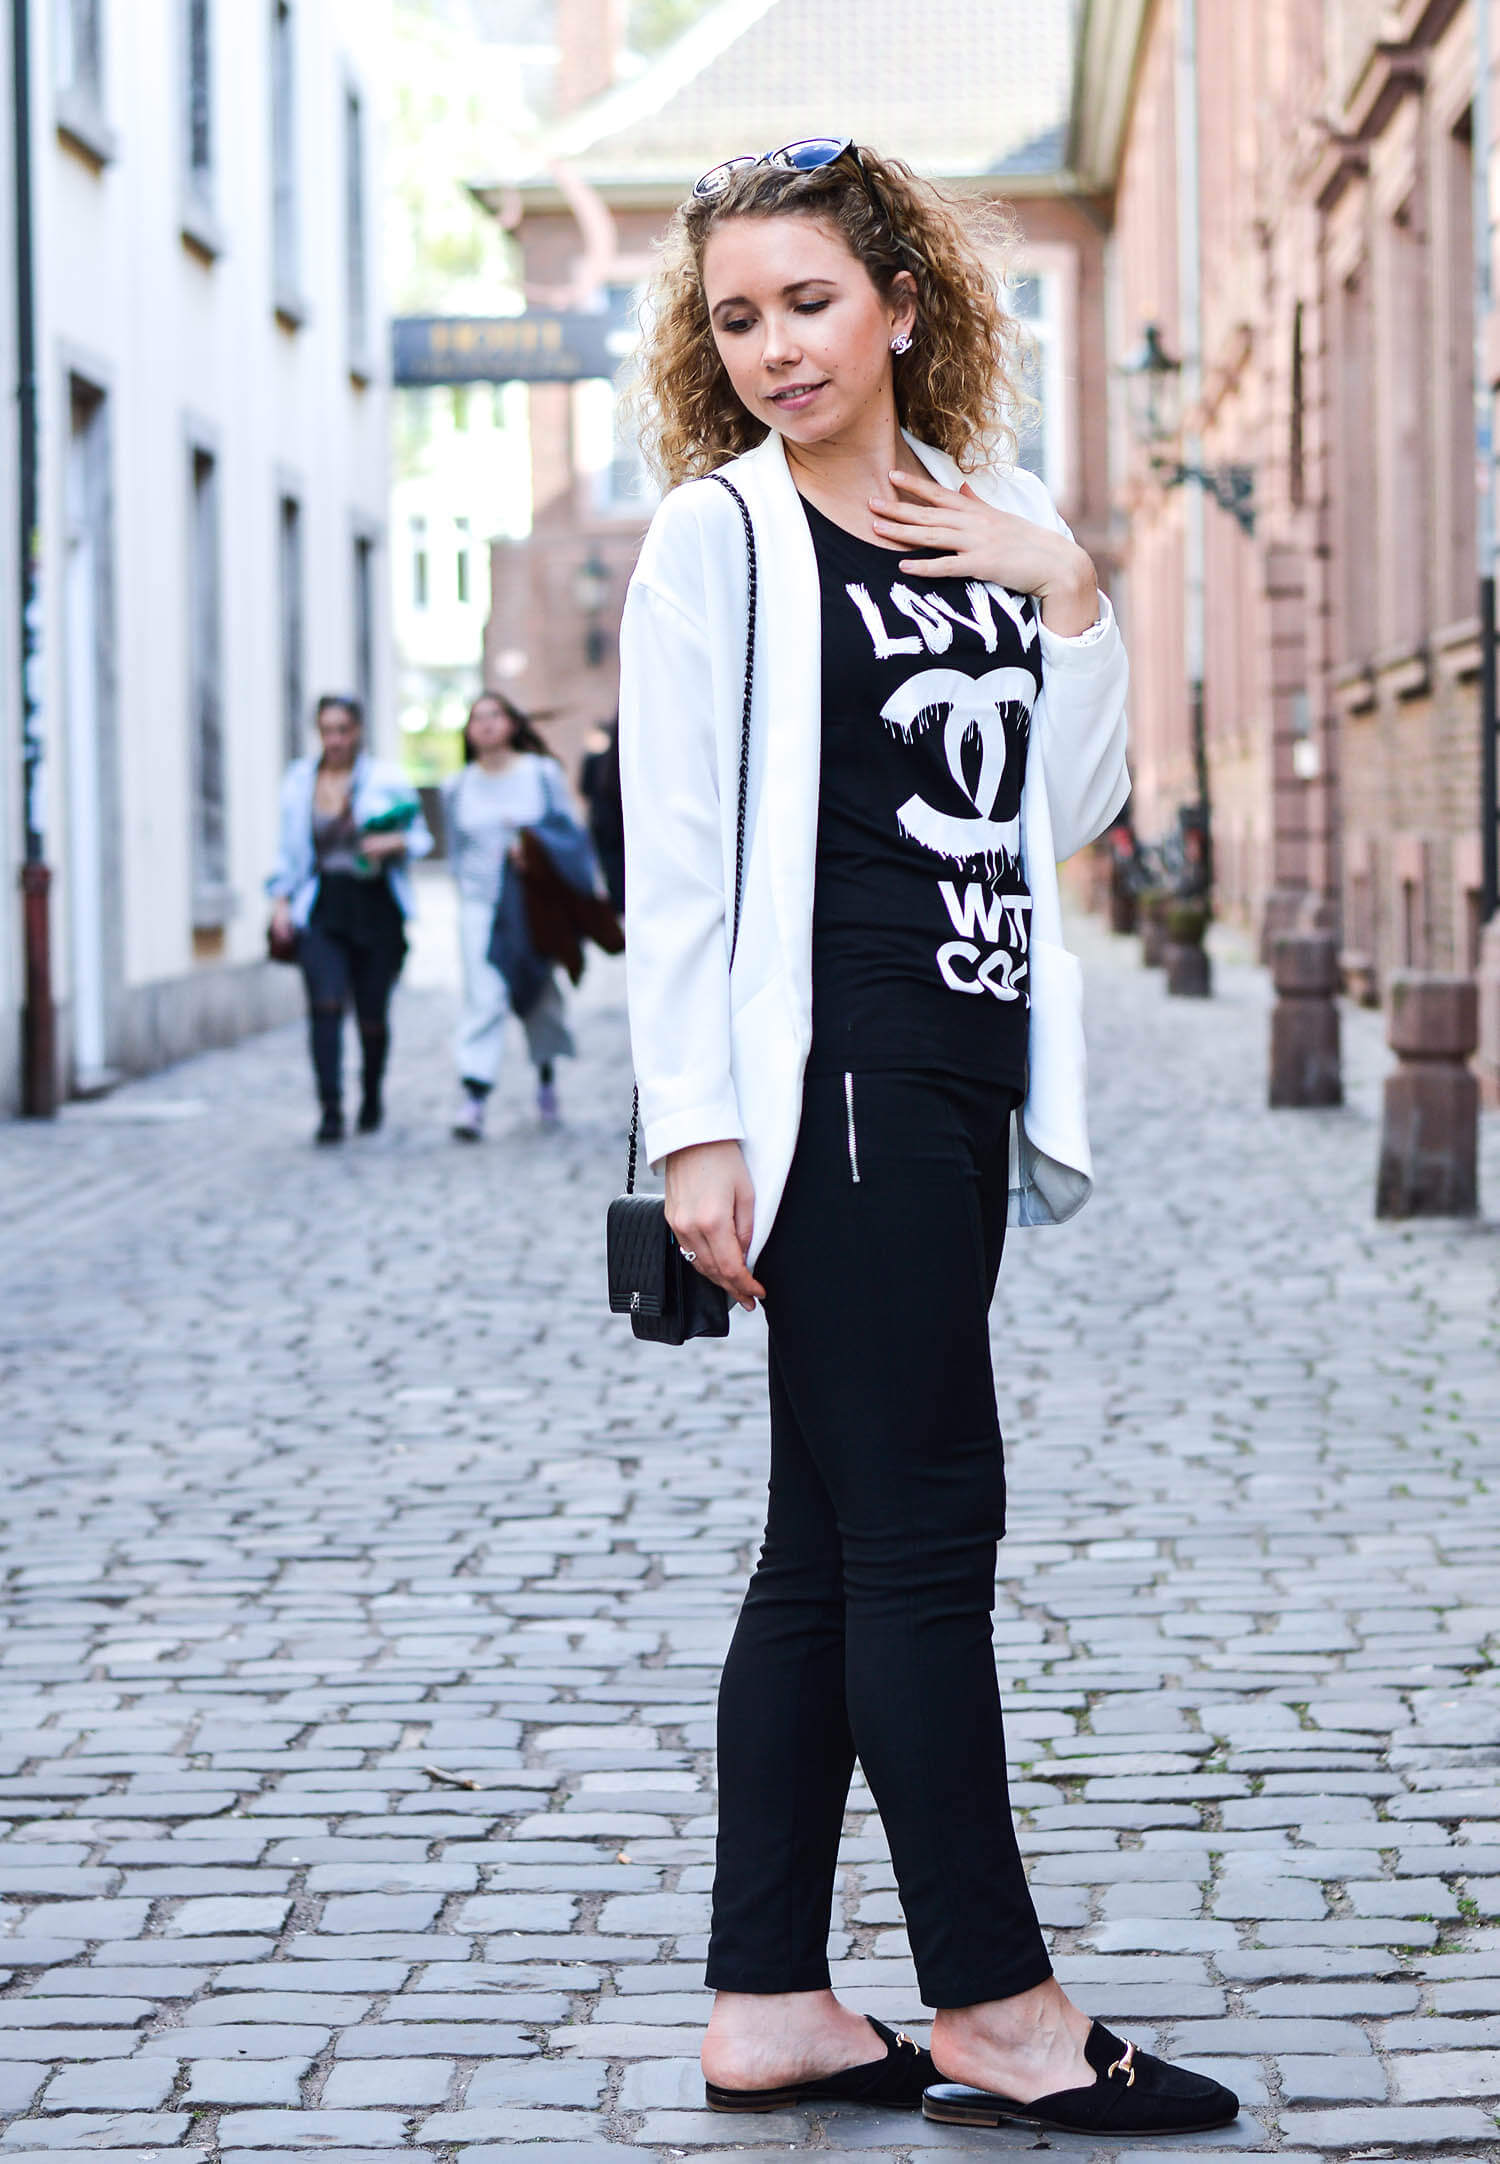 Kationette-fashionblog-Outfit-Coco-Chanel-streetstyle-blackandwhite-mules